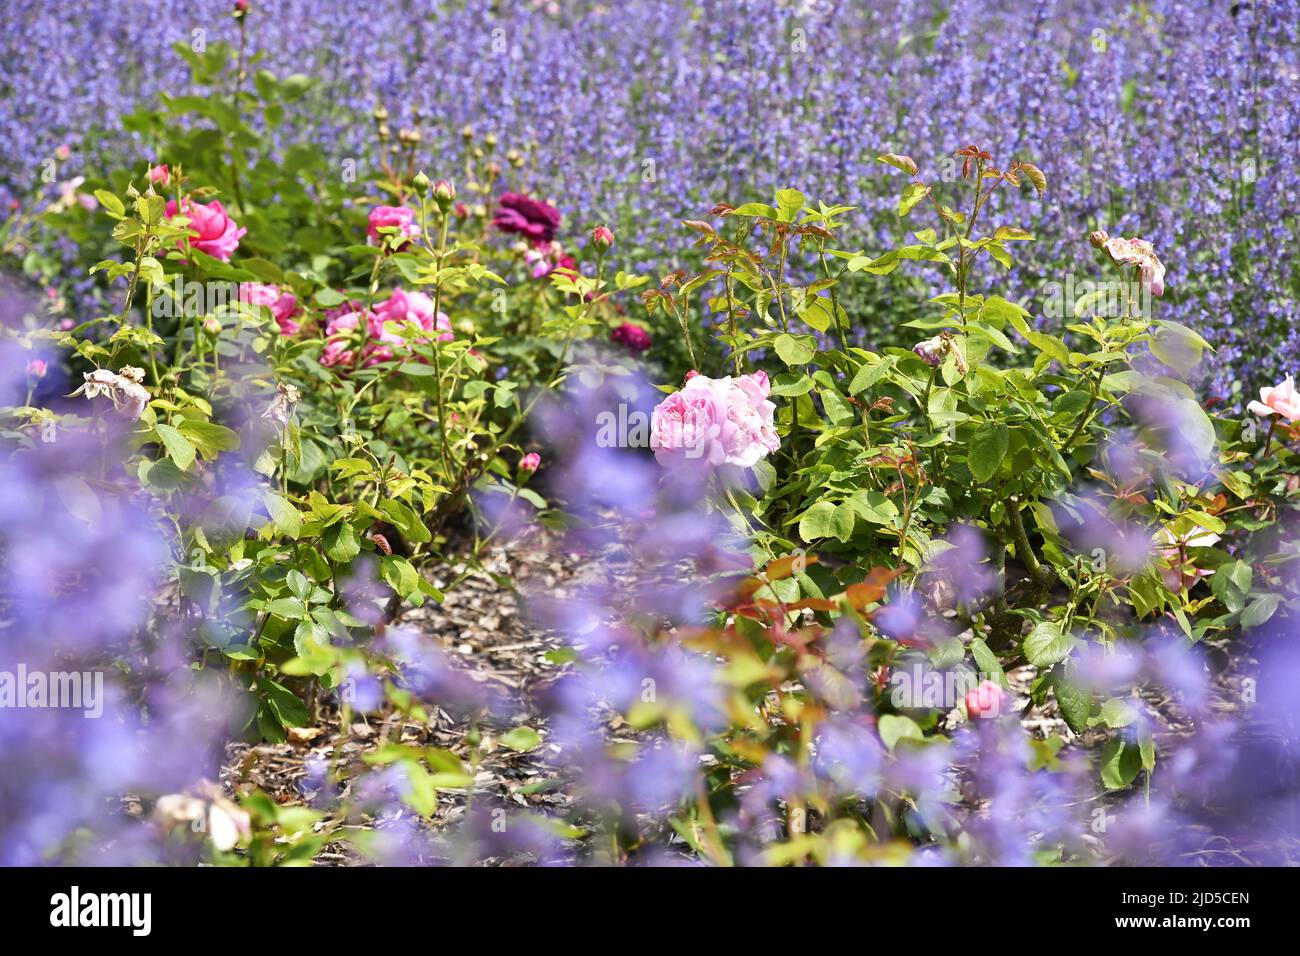 Lavender and rose flower beds in Richmond Terrace Gardens London UK. Stock Photo